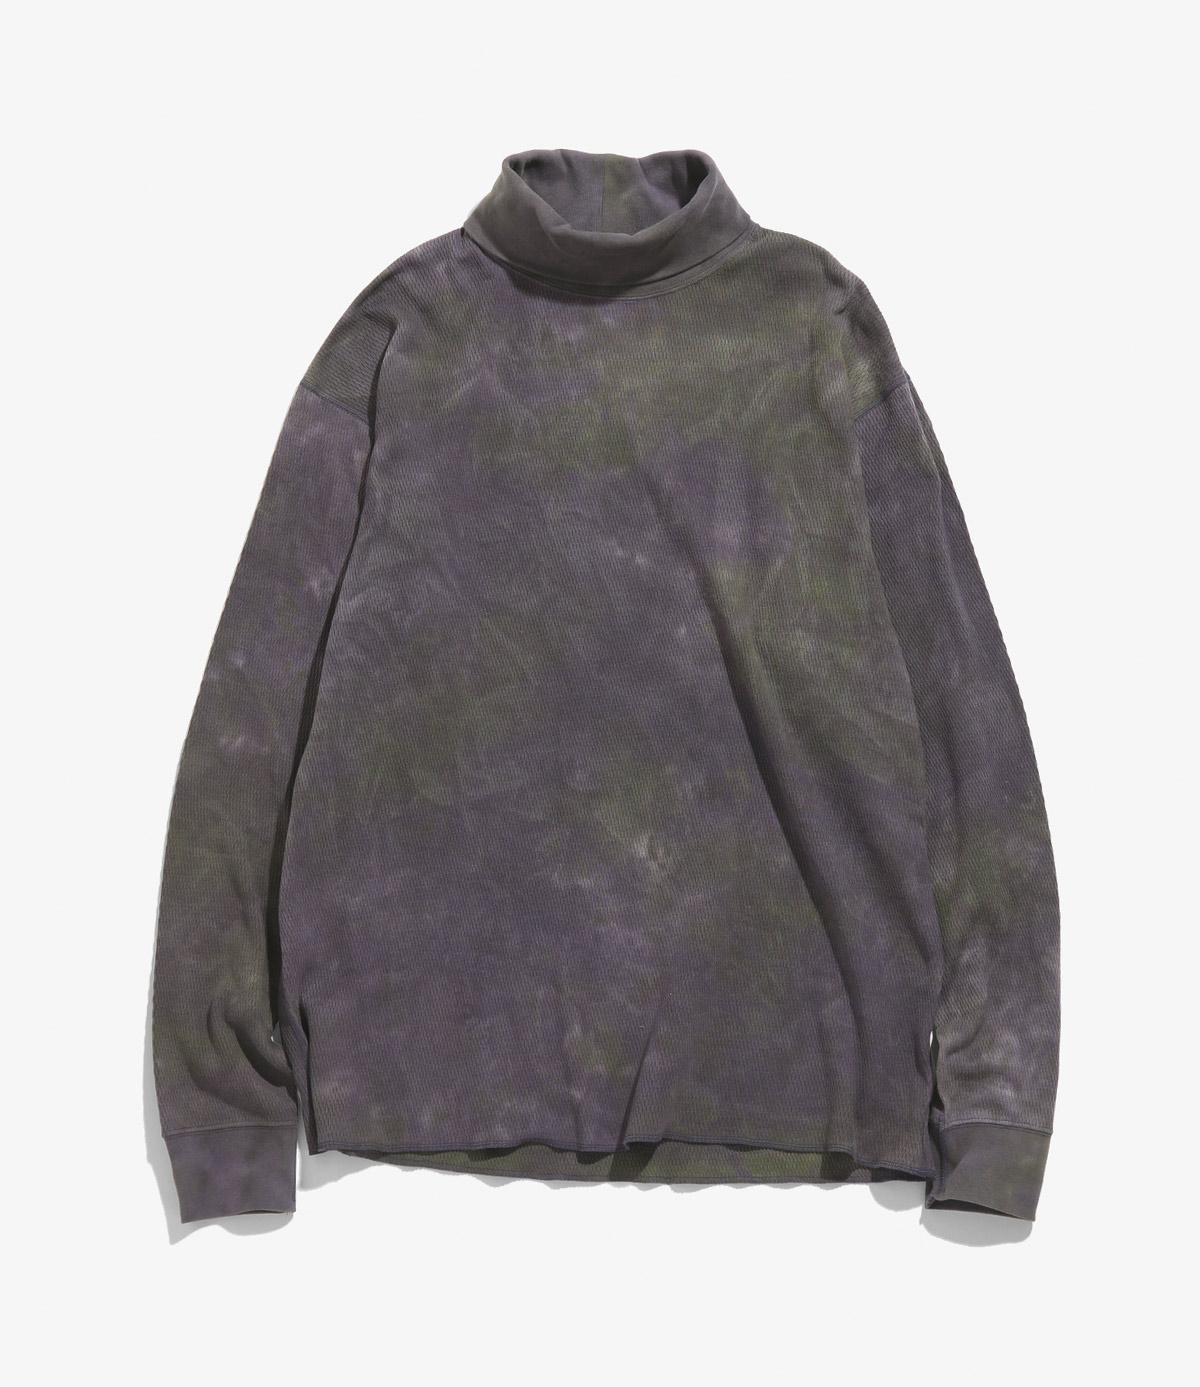 L/S TURTLE NECK TEE - COTTON THERMAL / UNEVEN DYE ¥17,600